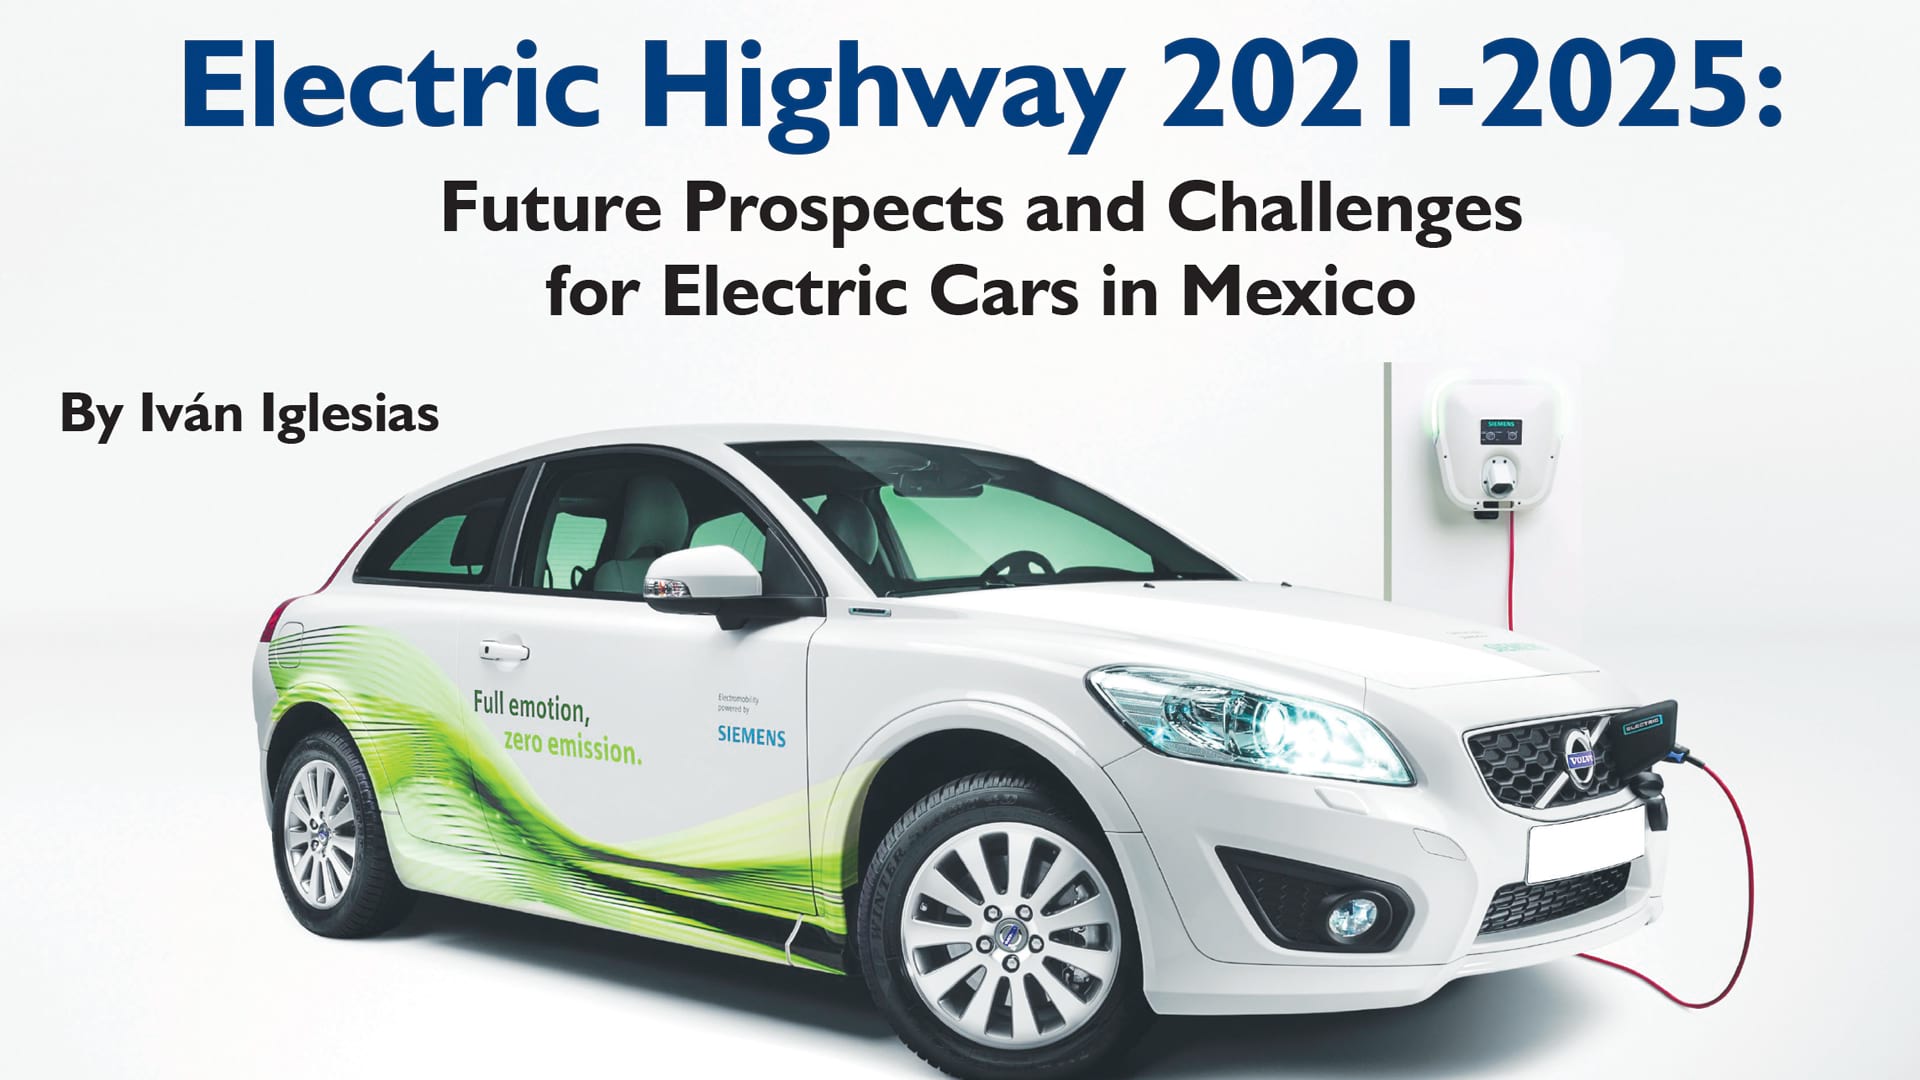 Electric Highway 2021-2025:Future Prospects and Challenges for Electric Cars in Mexico